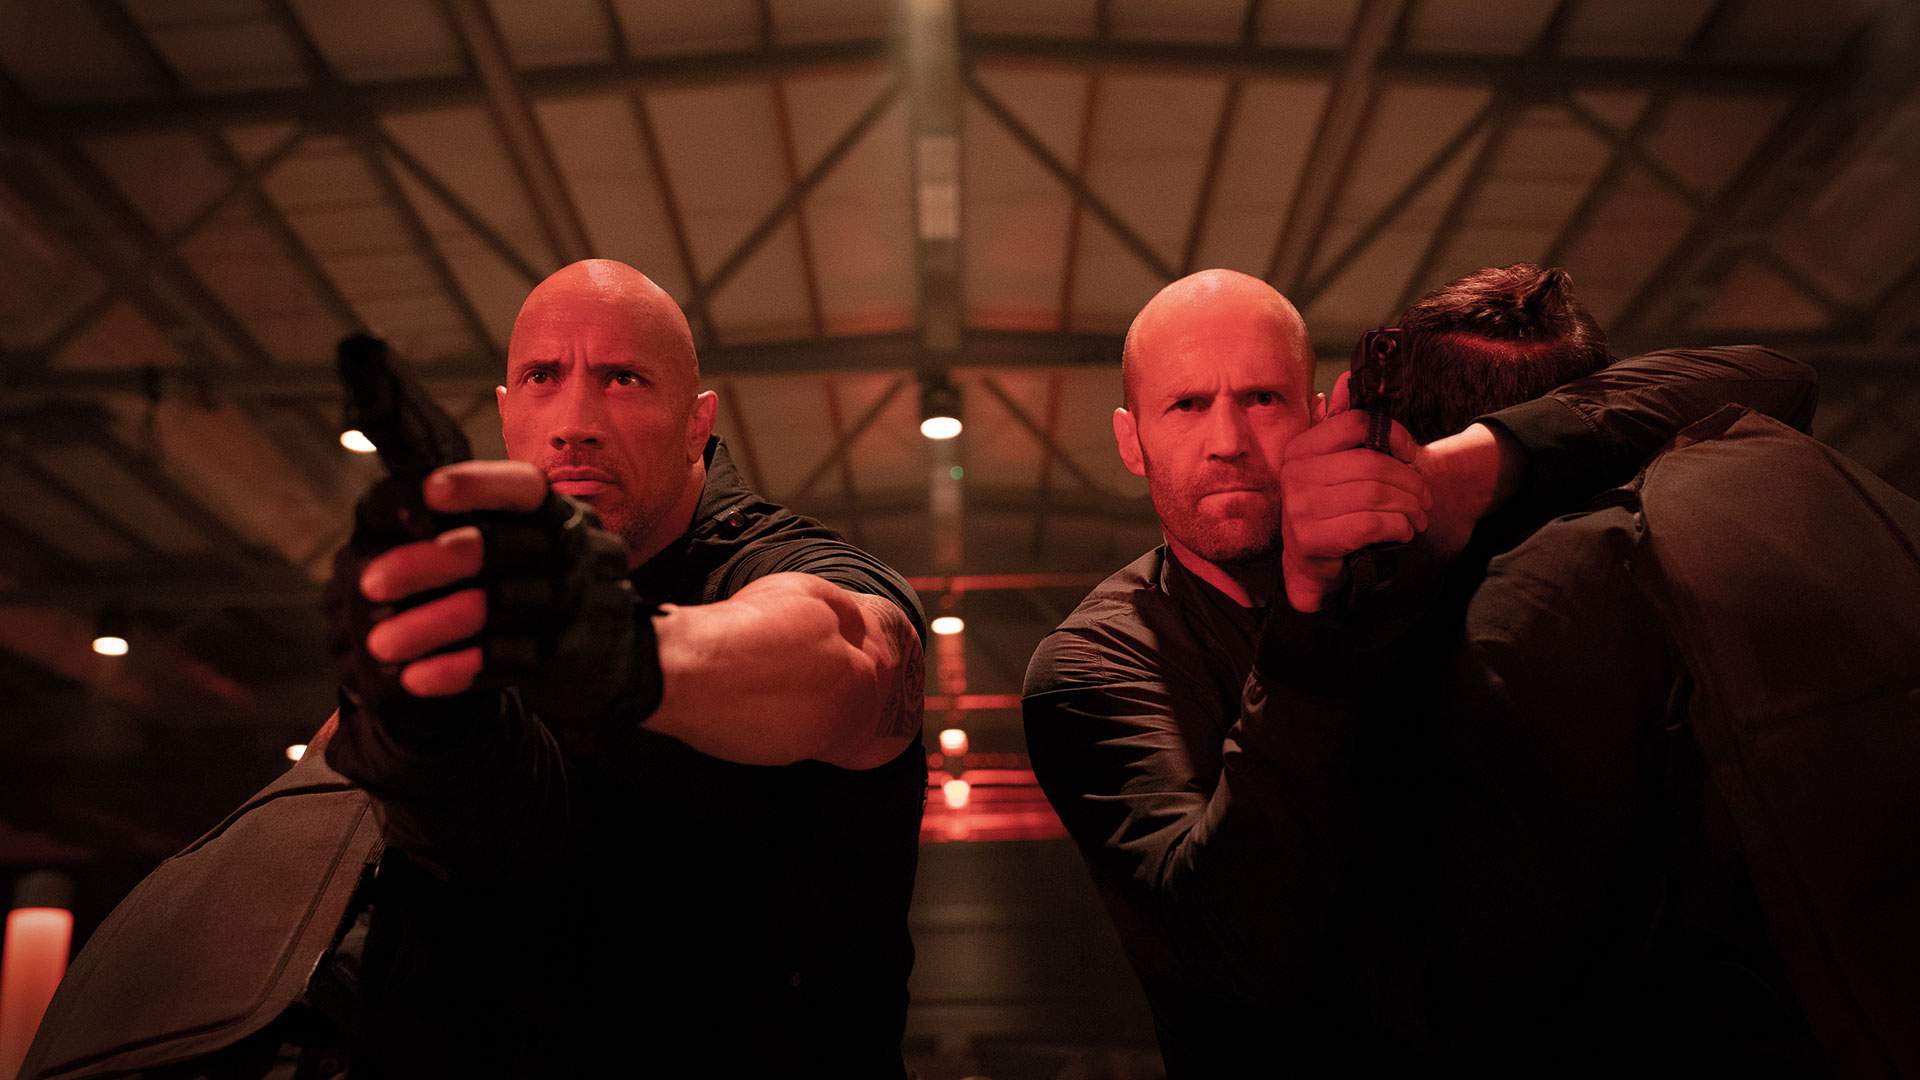 Prepare to Get Fast and Furious Again with the New Extended Trailer for 'Hobbs & Shaw'